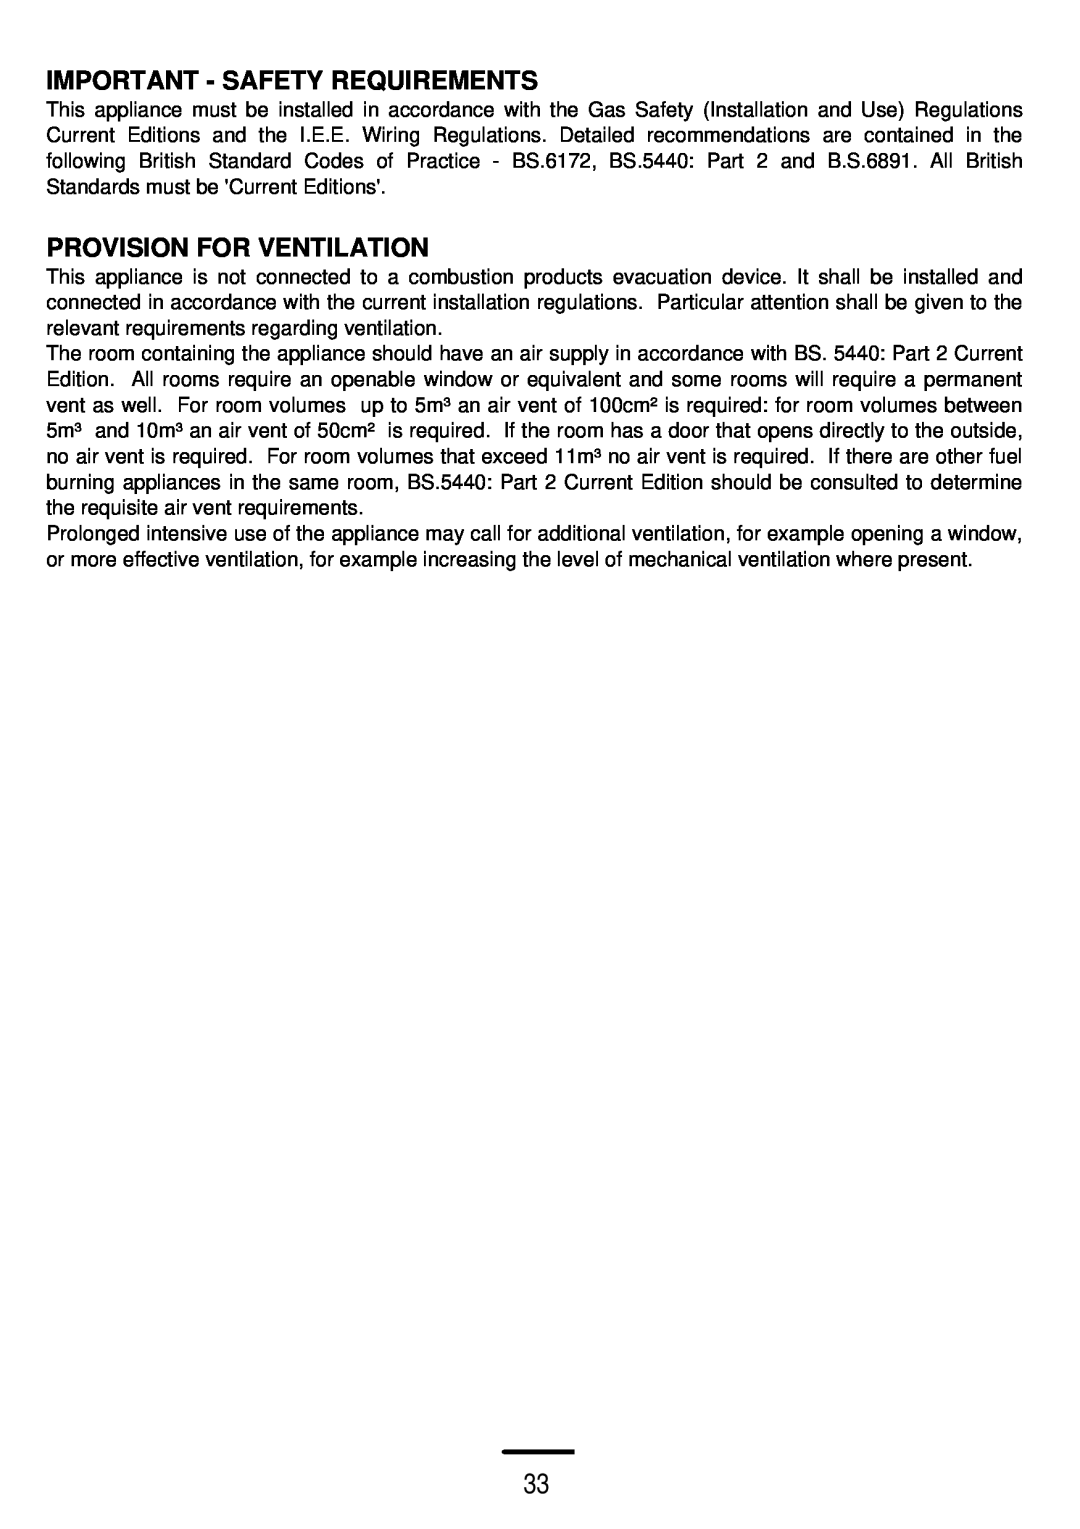 Electrolux 5 0 G L installation instructions Important - Safety Requirements, Provision For Ventilation 